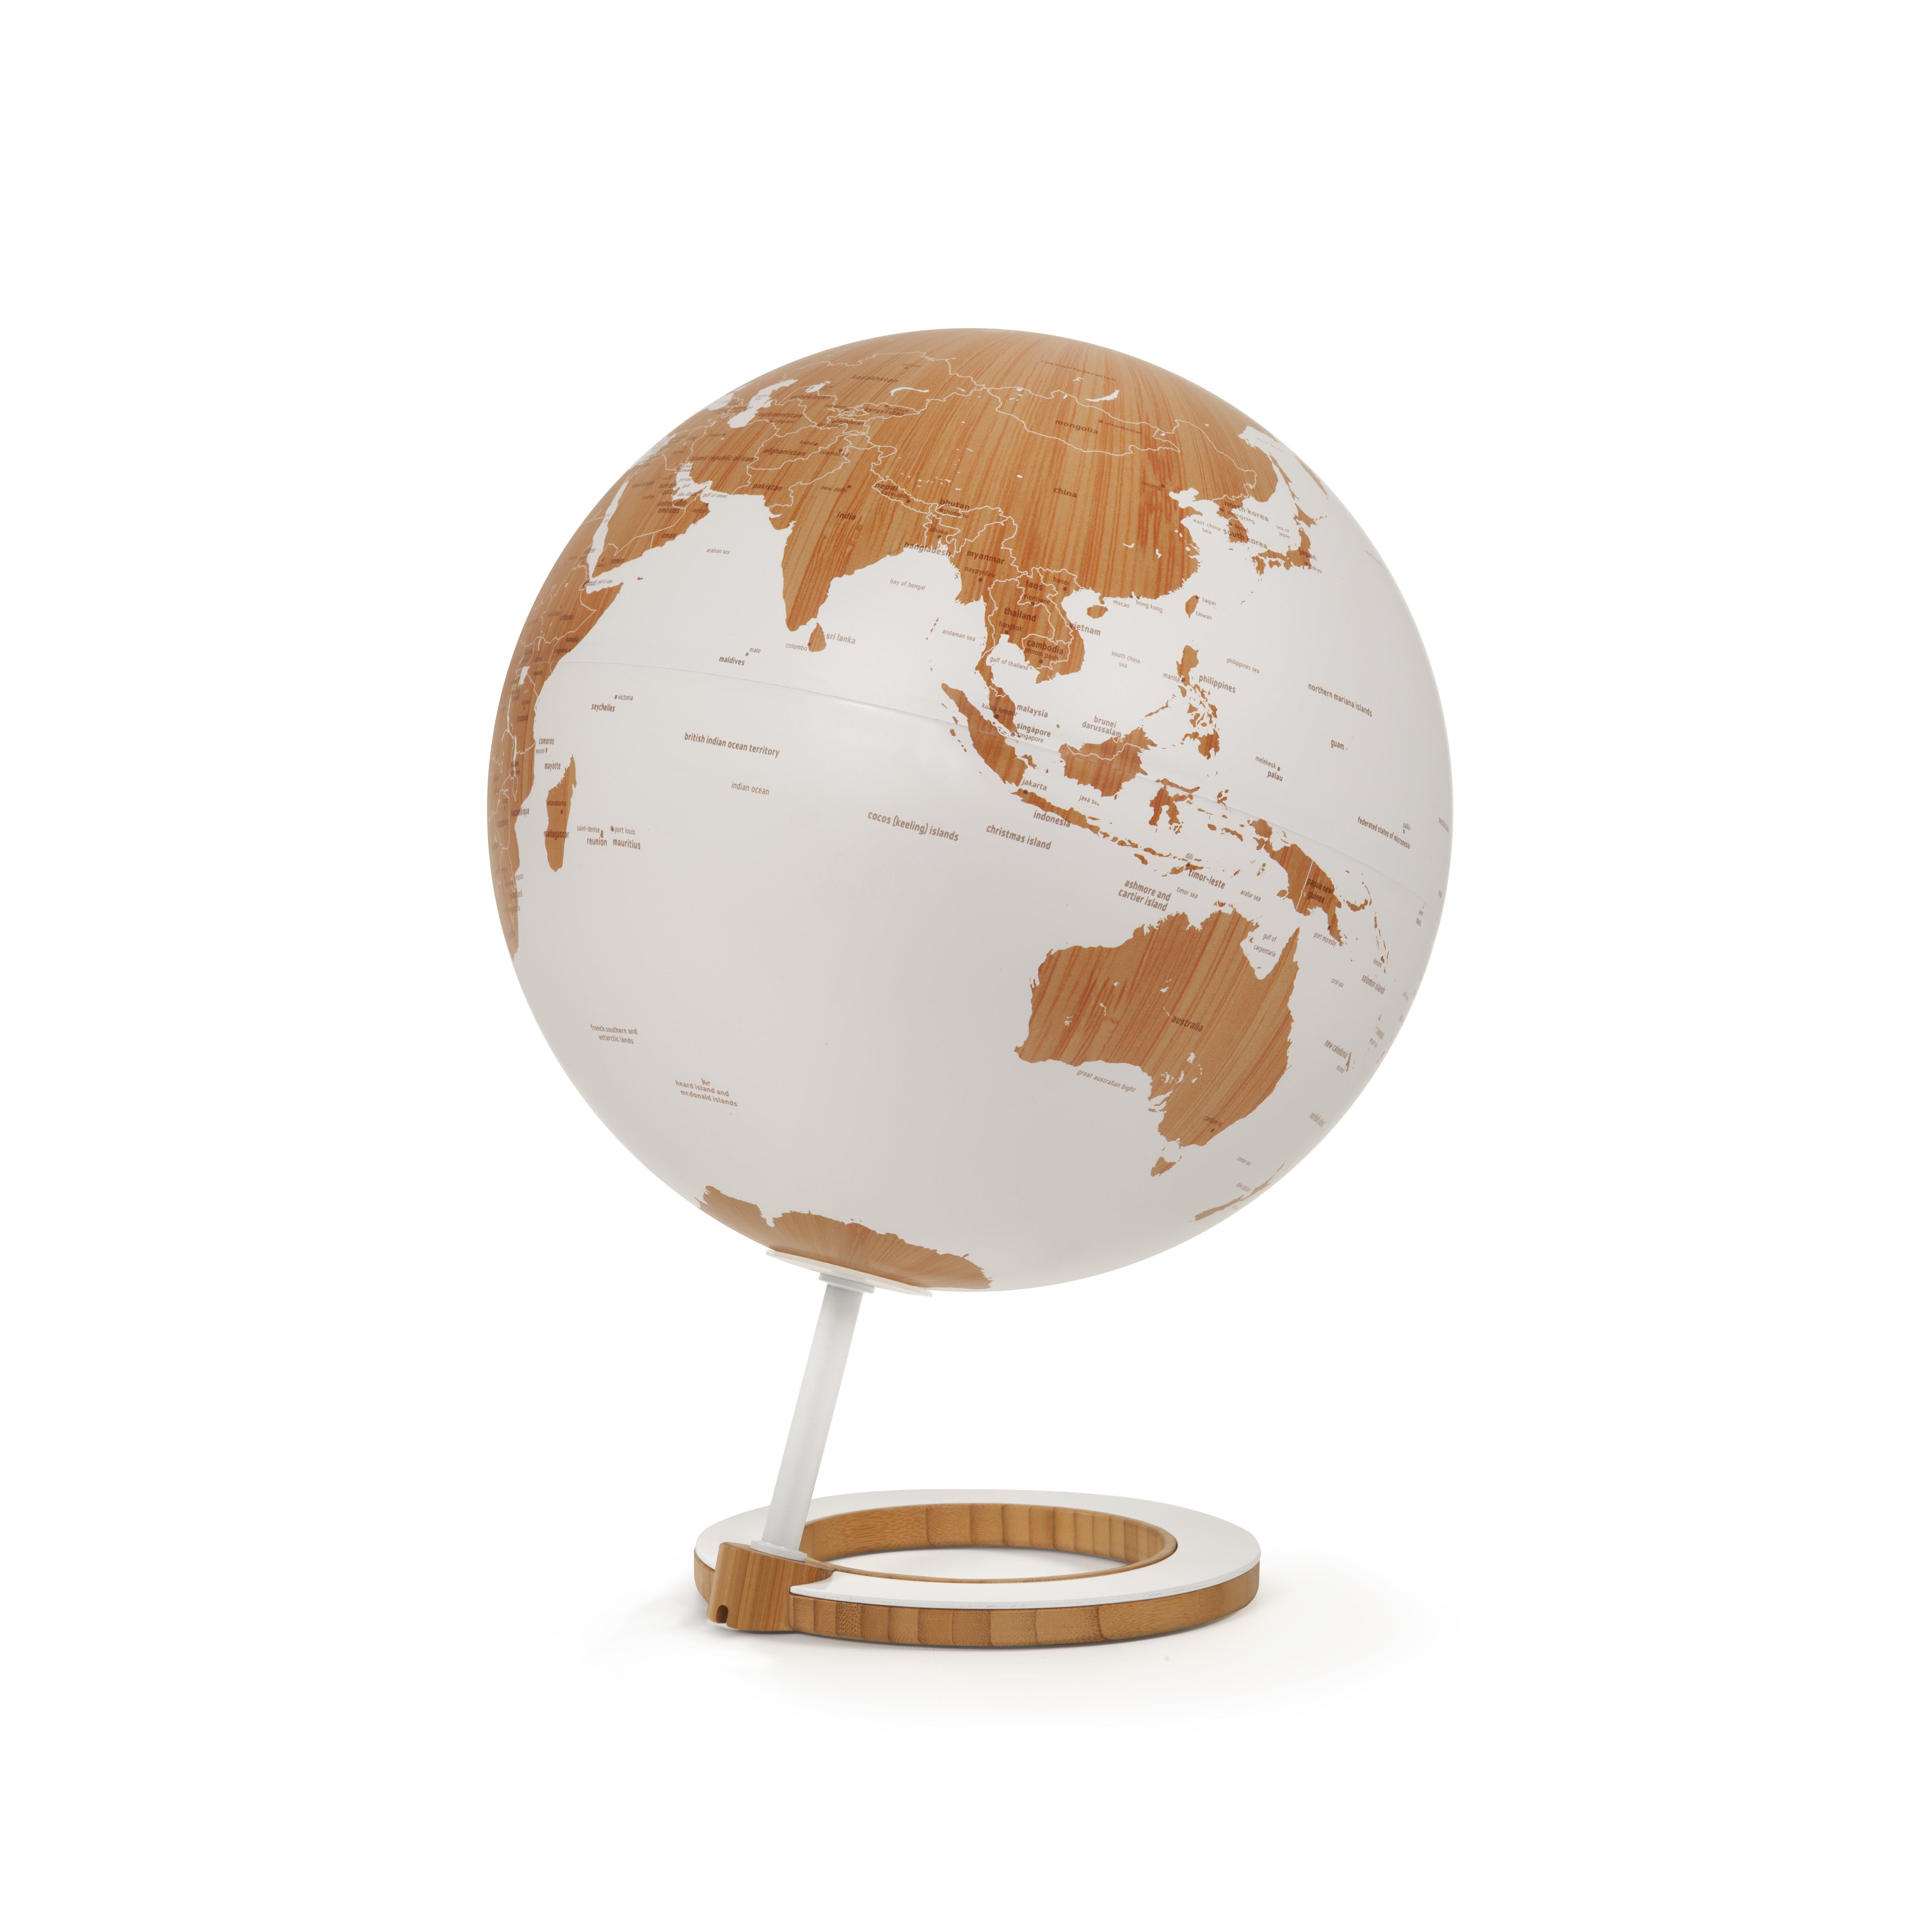 Bamboo and metal base

Non-illuminated

Crafted by Tecnodidattica who supplies the world with National Geographic Globes and this particularly fine collection of Atmosphere globes. Largely handmade, the globes are blown much like glass, and